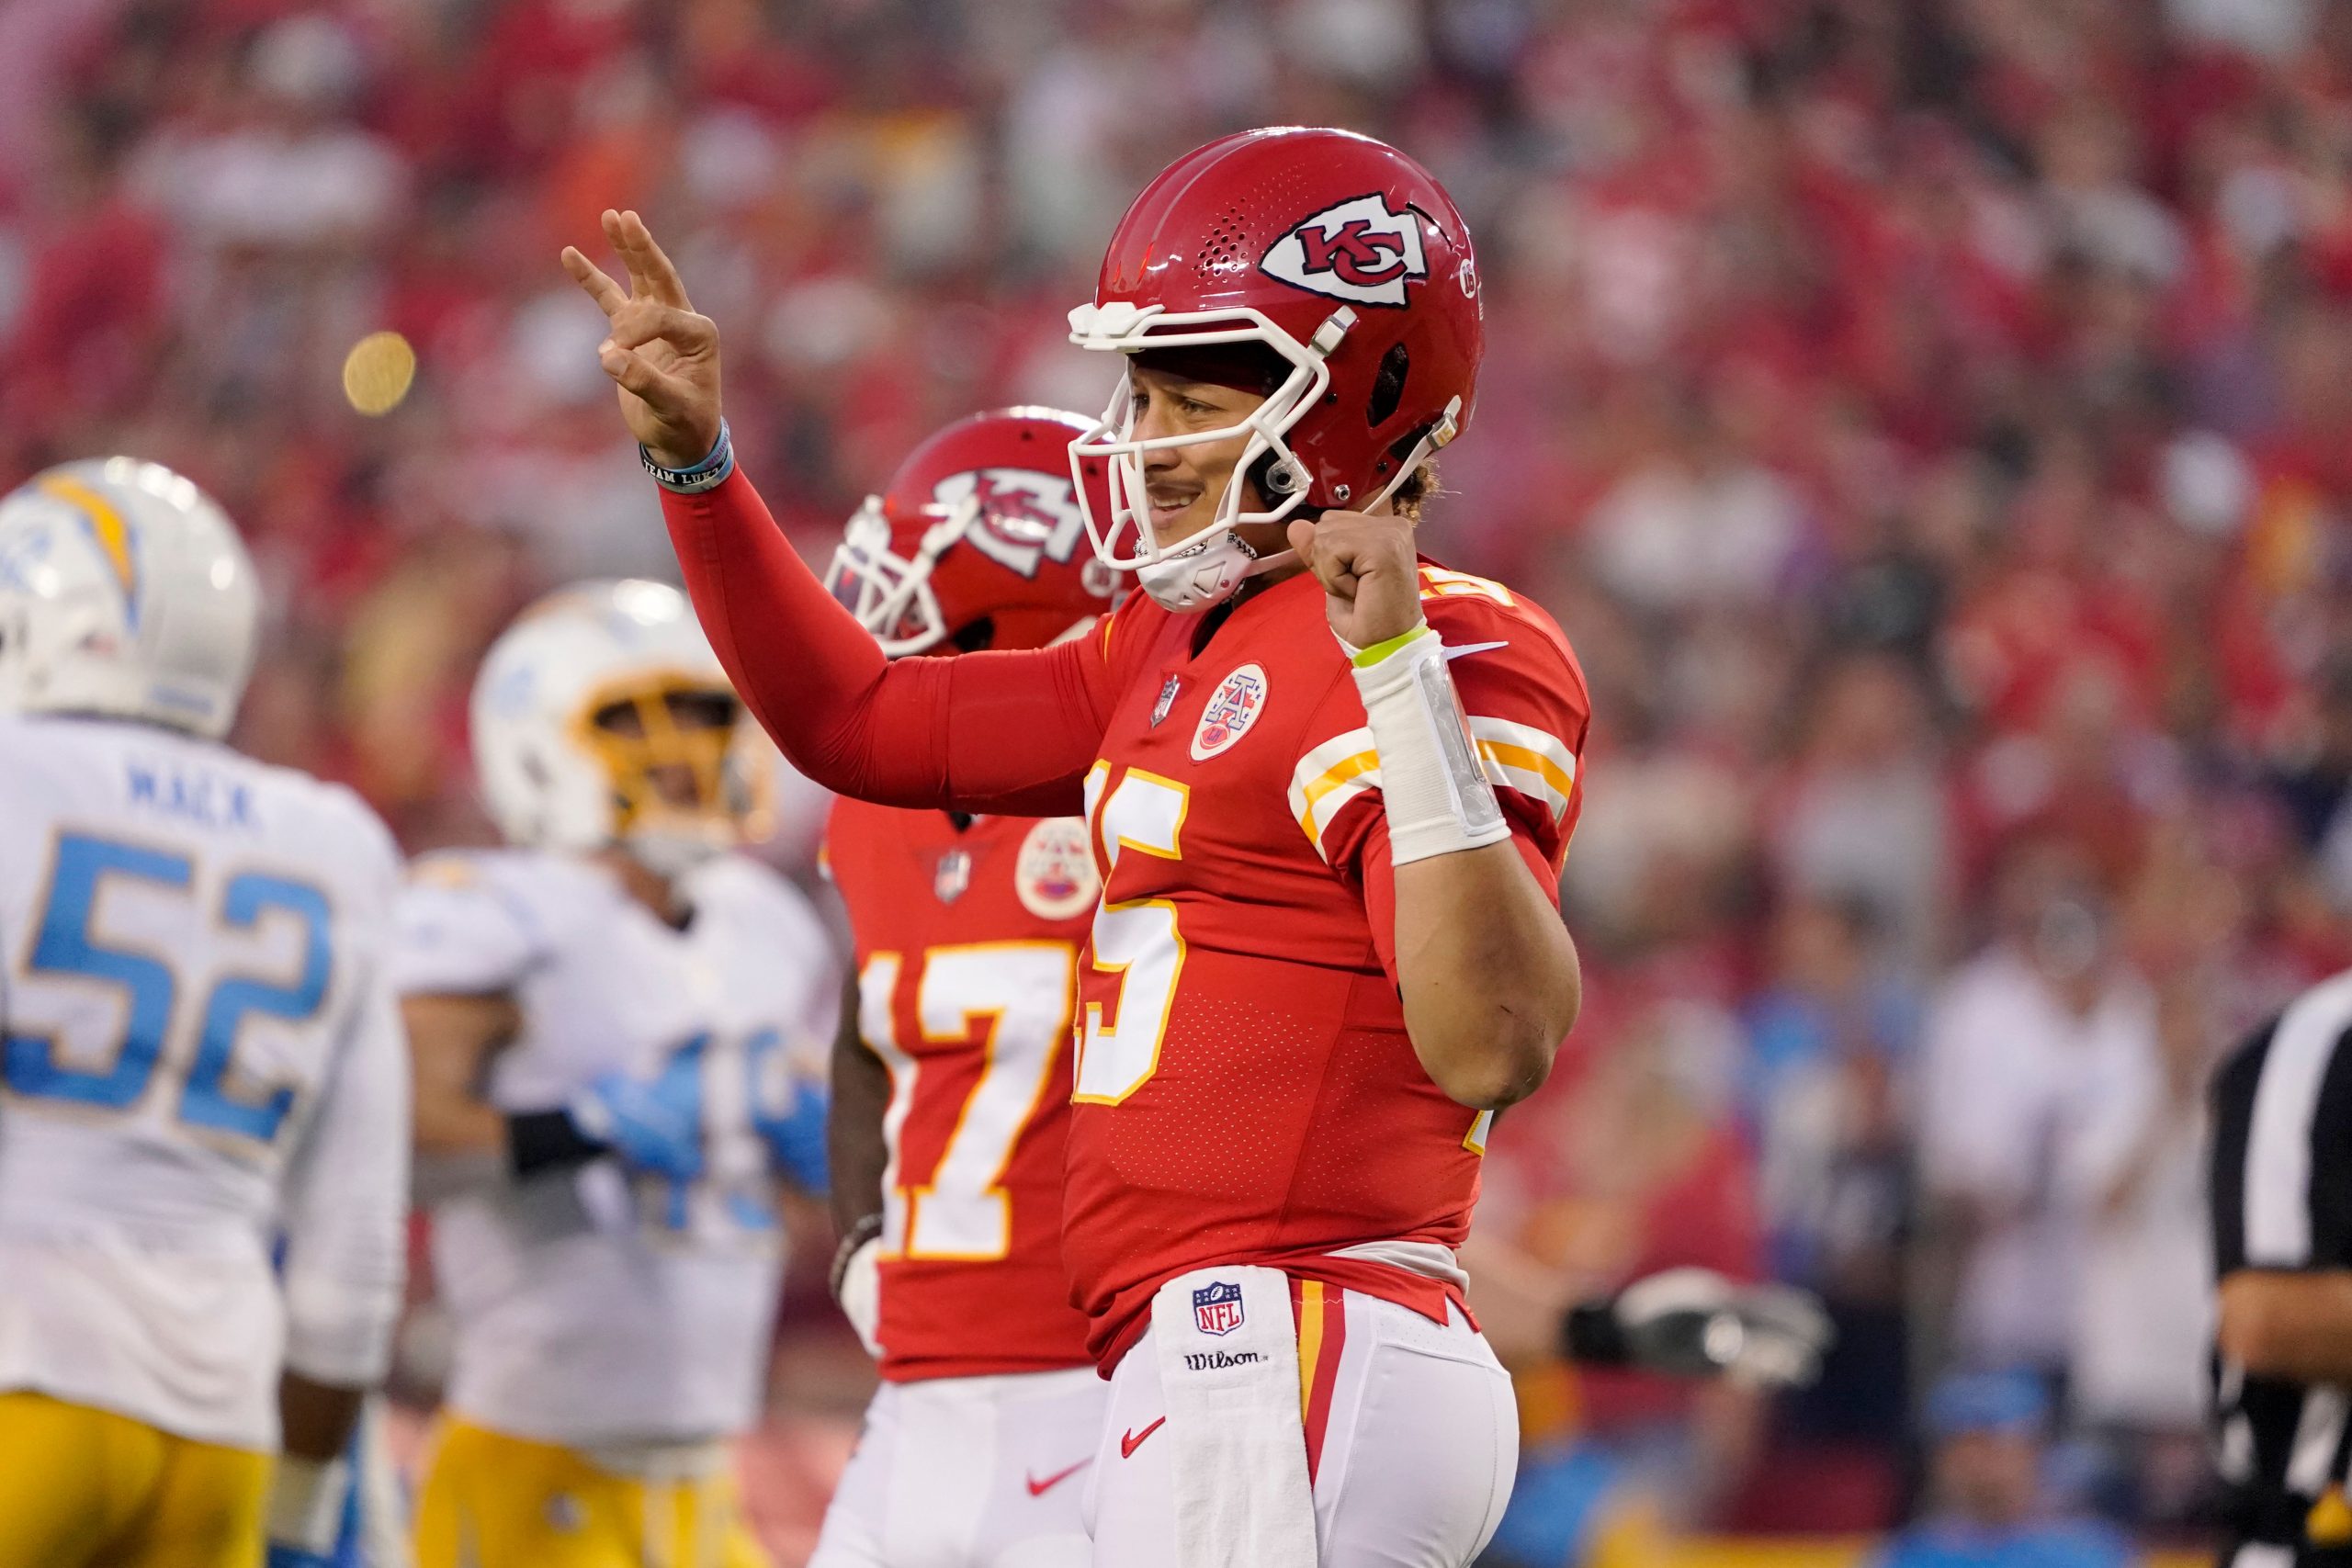 Watch: Chiefs fans cheer for QB Mahomes ahead of first home game